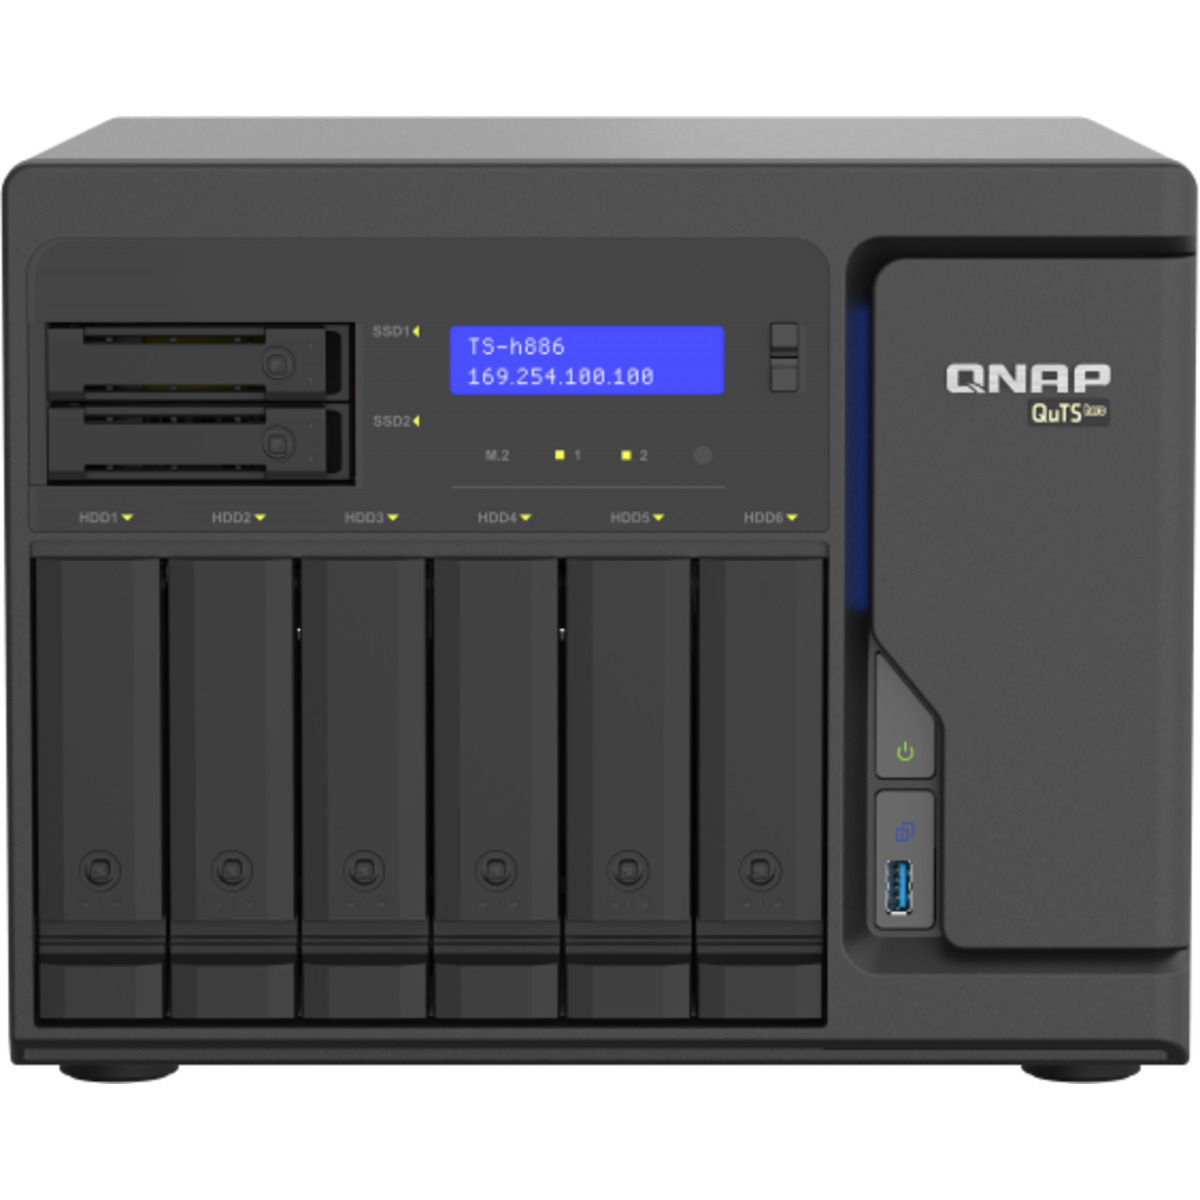 QNAP TS-h886 QuTS hero NAS 32tb 6+2-Bay Desktop Large Business / Enterprise NAS - Network Attached Storage Device 4x8tb Seagate BarraCuda ST8000DM004 3.5 5400rpm SATA 6Gb/s HDD CONSUMER Class Drives Installed - Burn-In Tested TS-h886 QuTS hero NAS